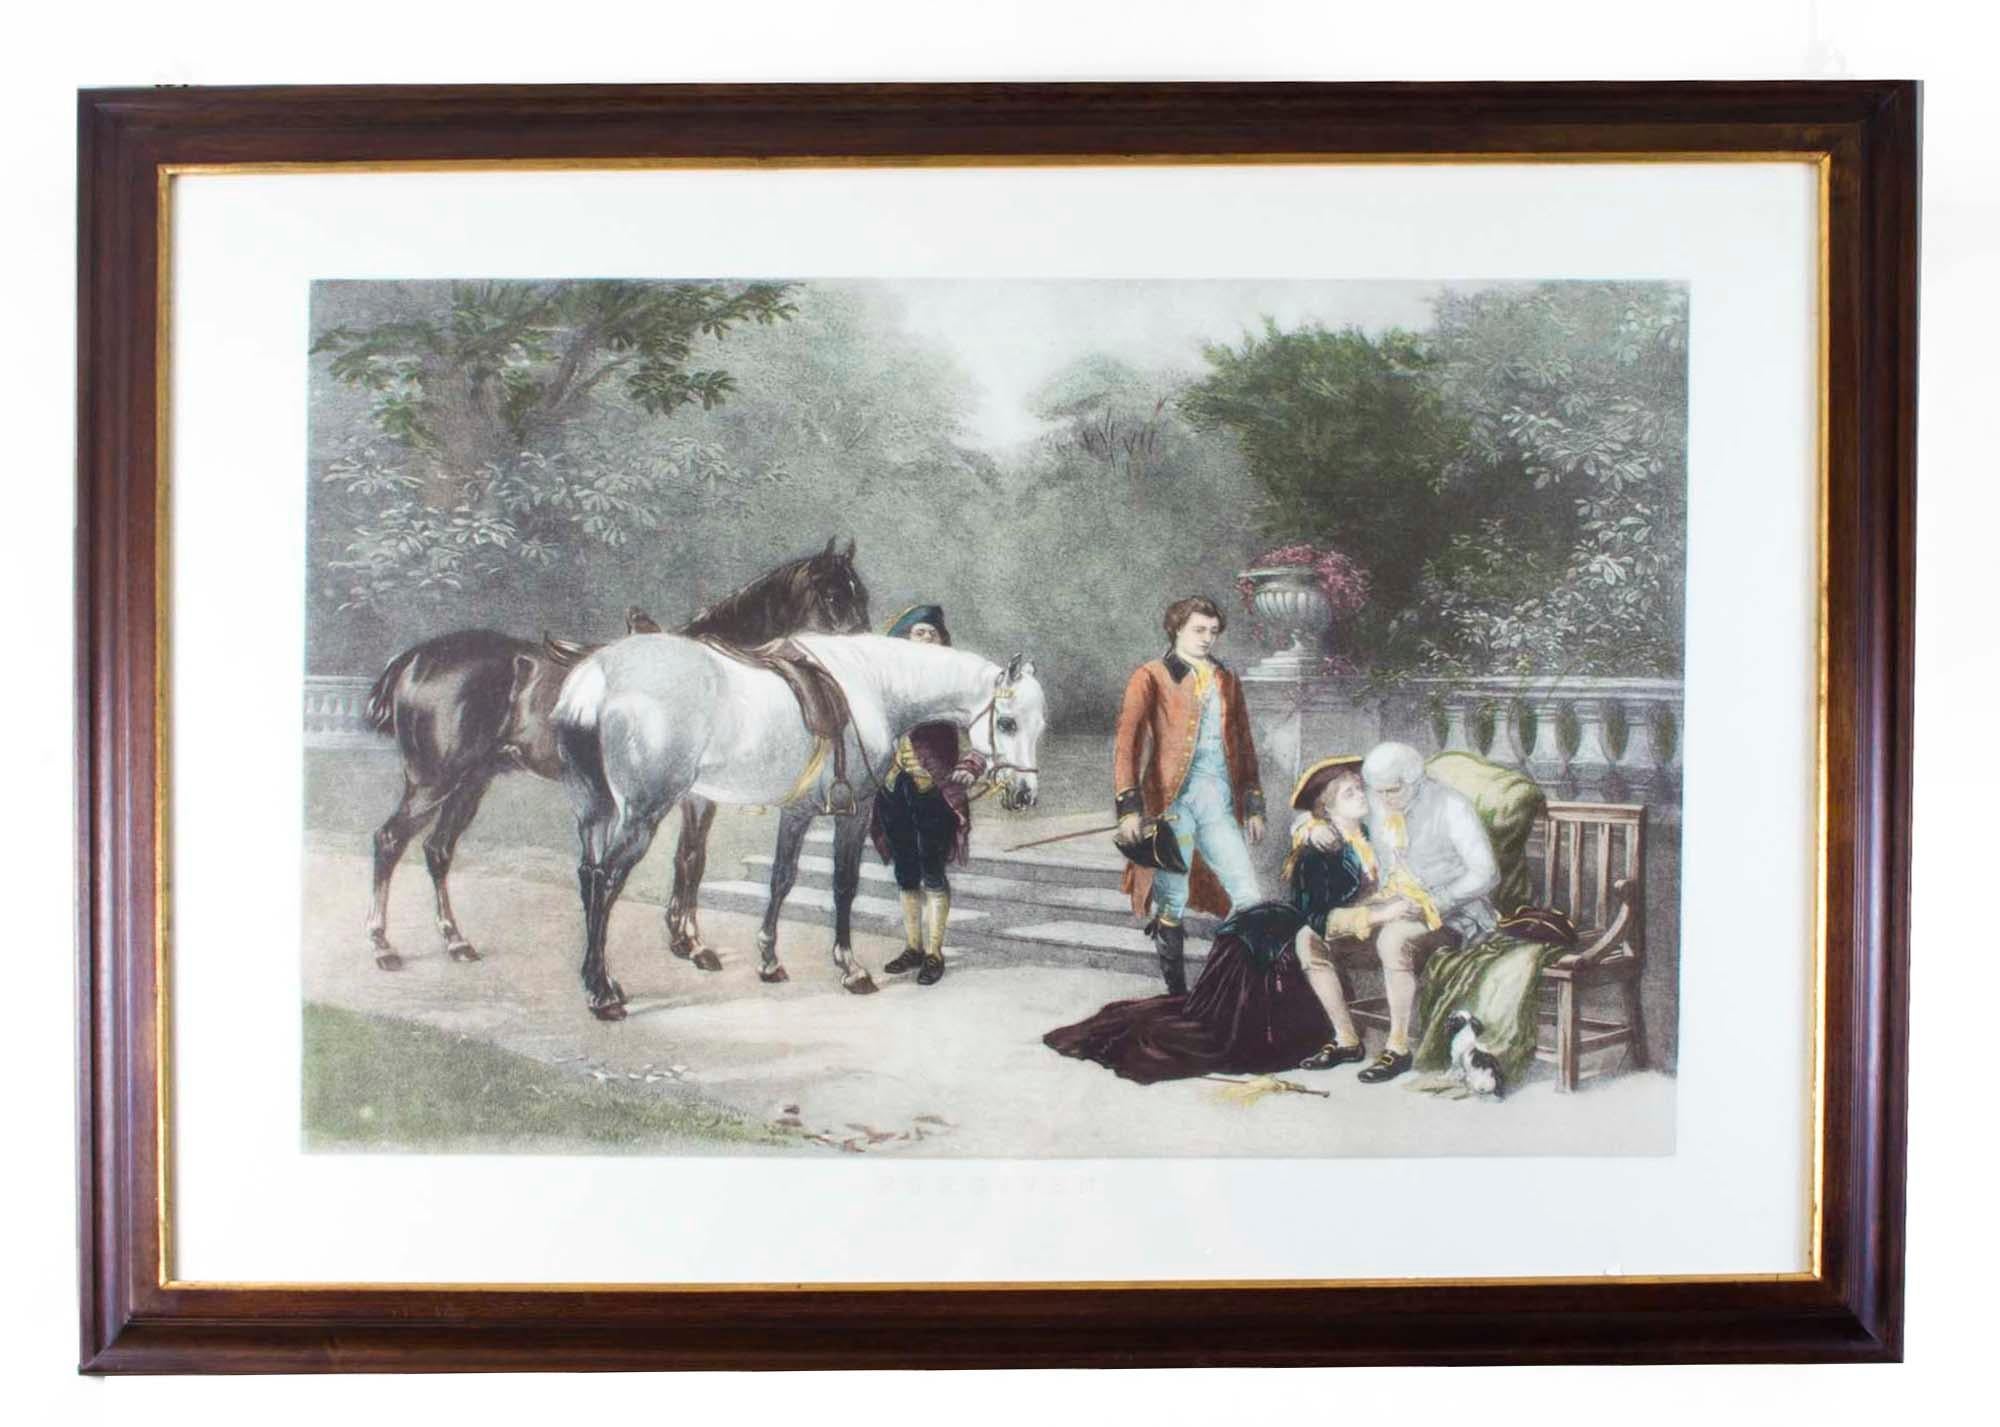 This is a delightful pair of mahogany framed vintage equestrian colored prints entitled 'Forgiven' and 'too Late,' after Heywood Hardy, and dating from the late 20th century.

THE BOTANICAL NAME FOR THE MAHOGANY THIS ITEM IS MADE OF IS SWIETENIA